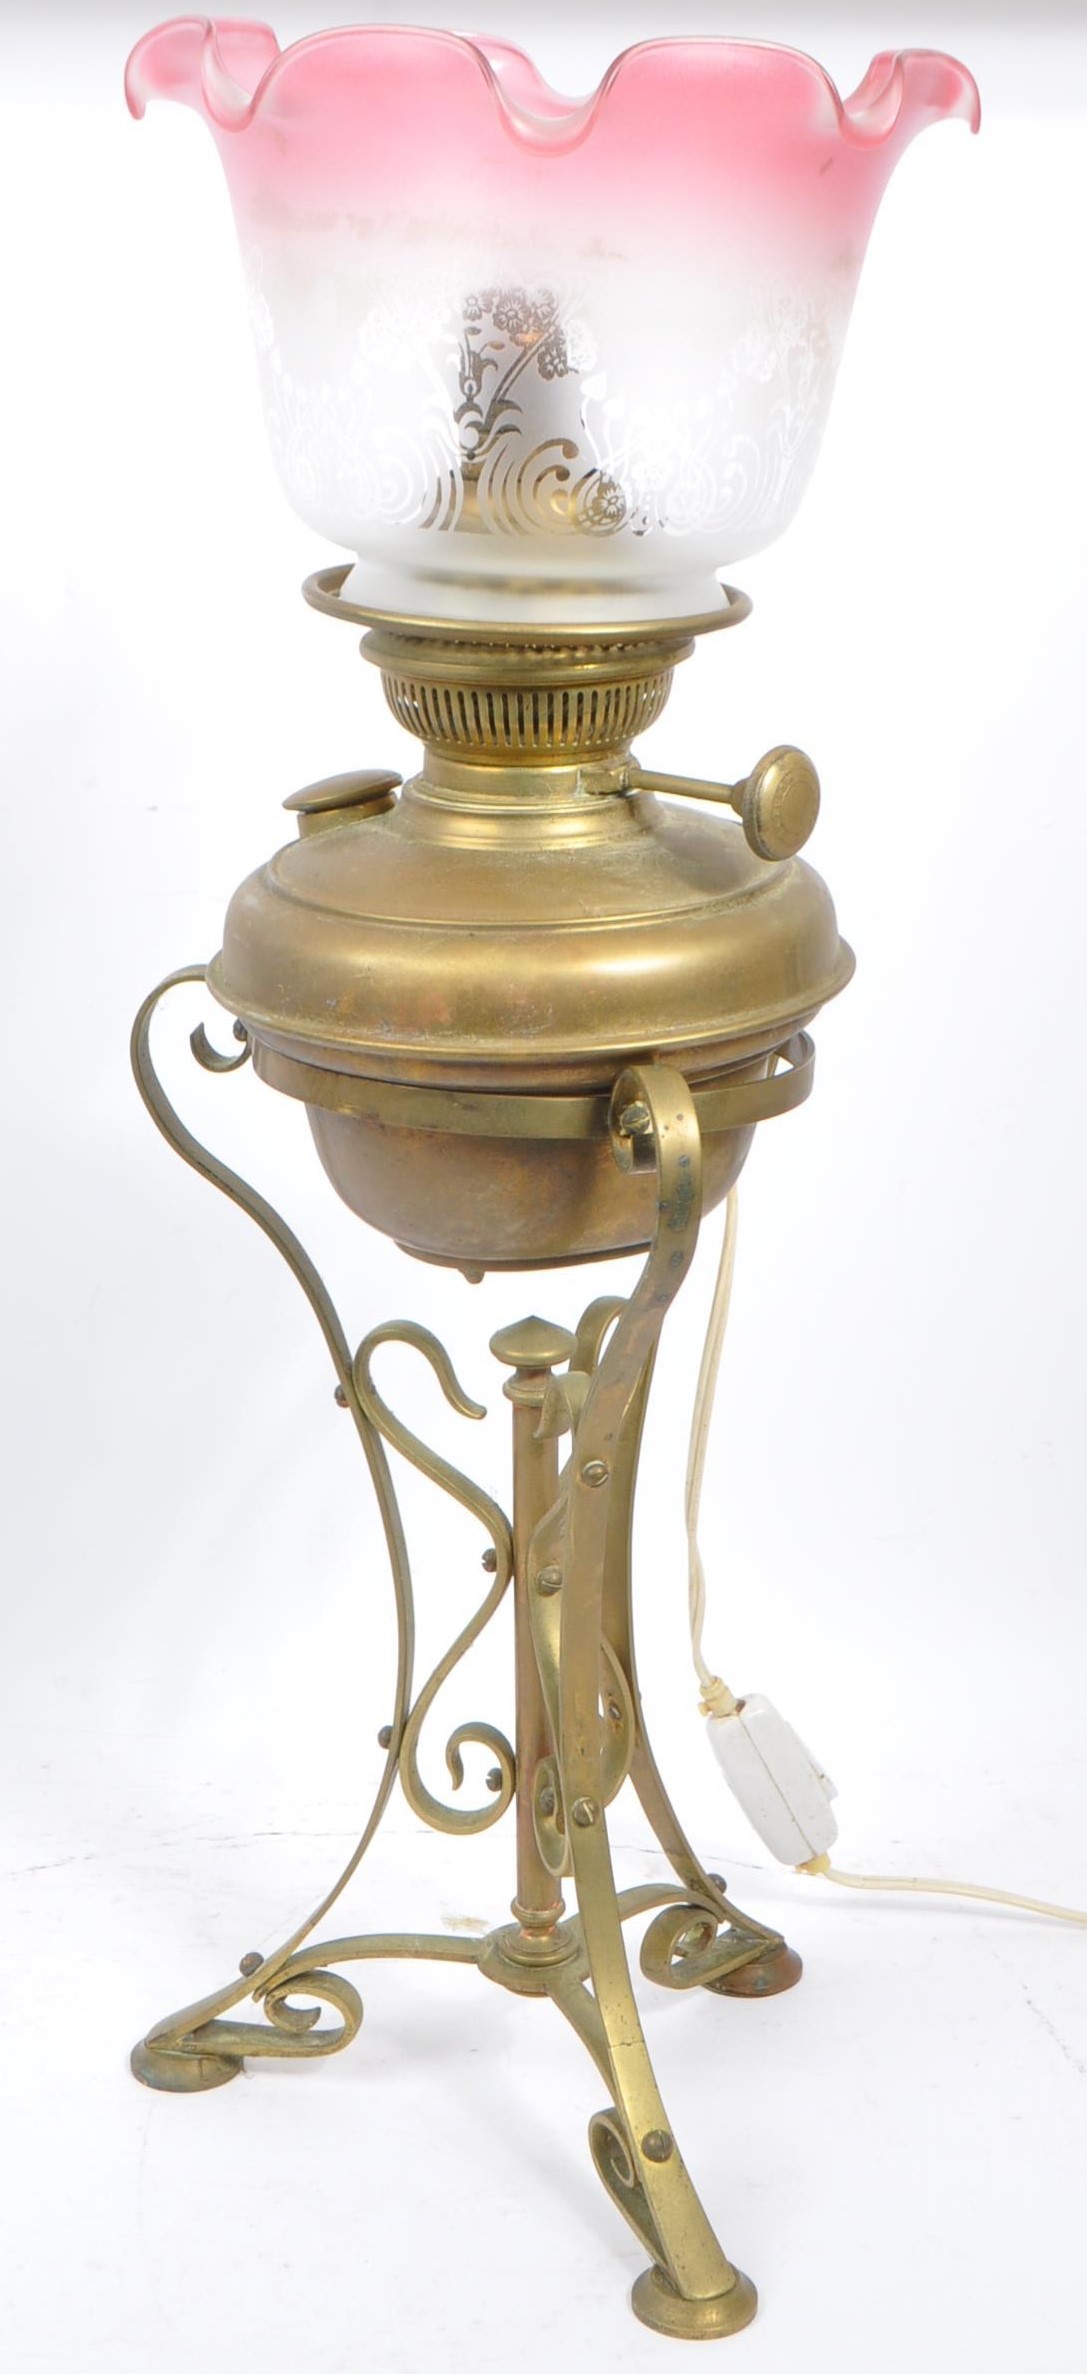 ART NOUVEAU MANNER CONVERTED OIL LAMP WITH PINK SHADE